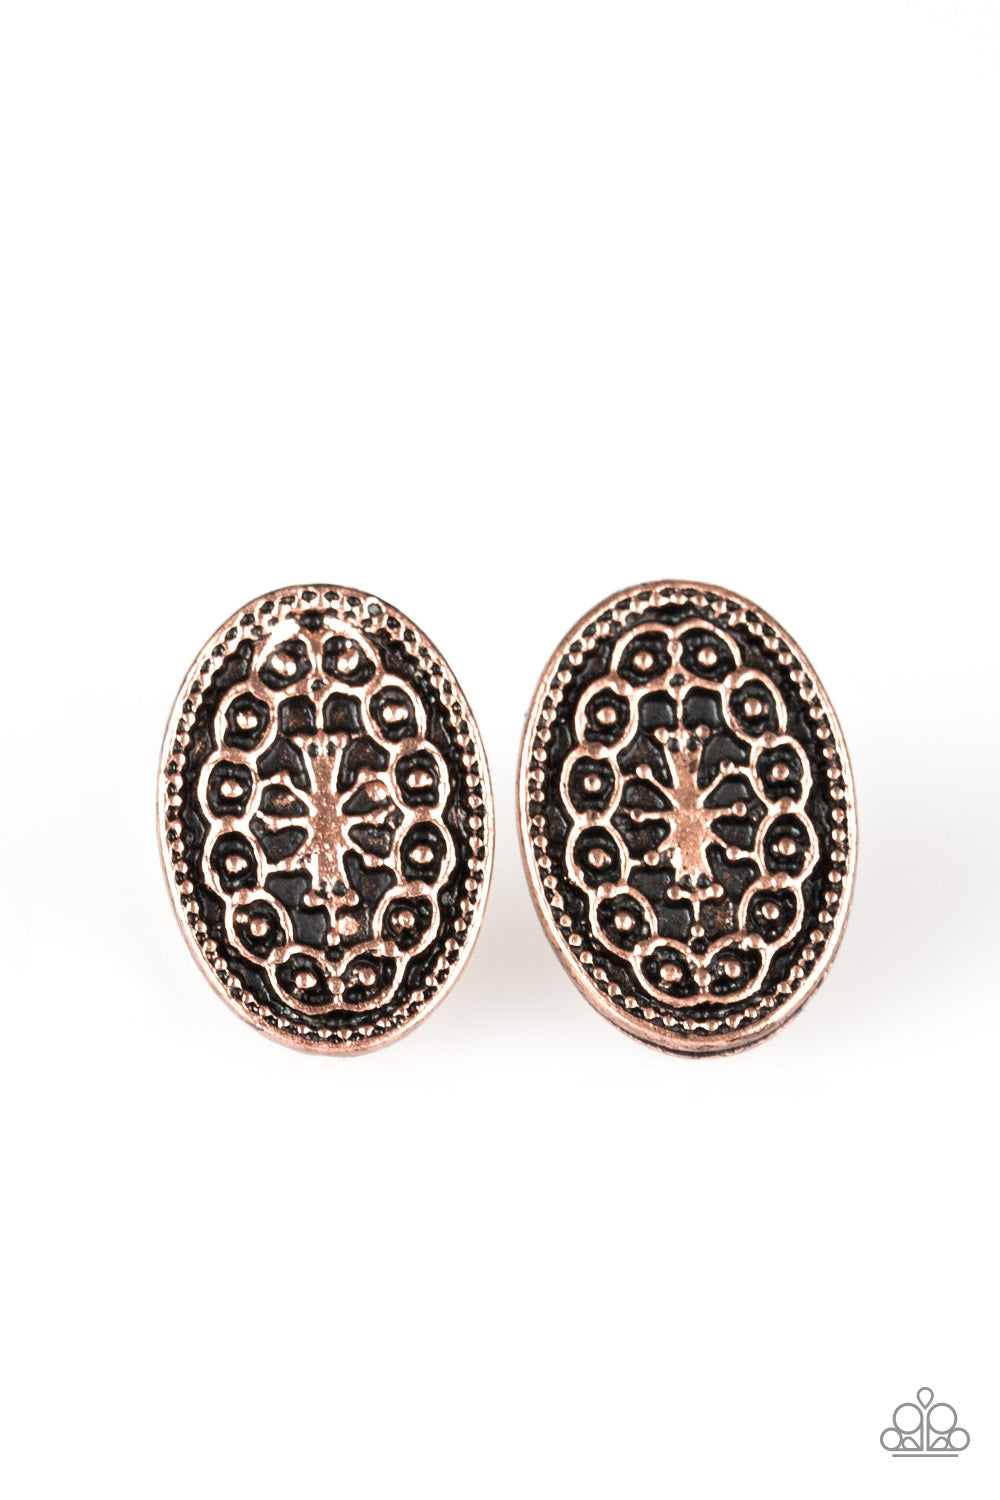 five-dollar-jewelry-just-a-flicker-copper-post-post earrings-paparazzi-accessories